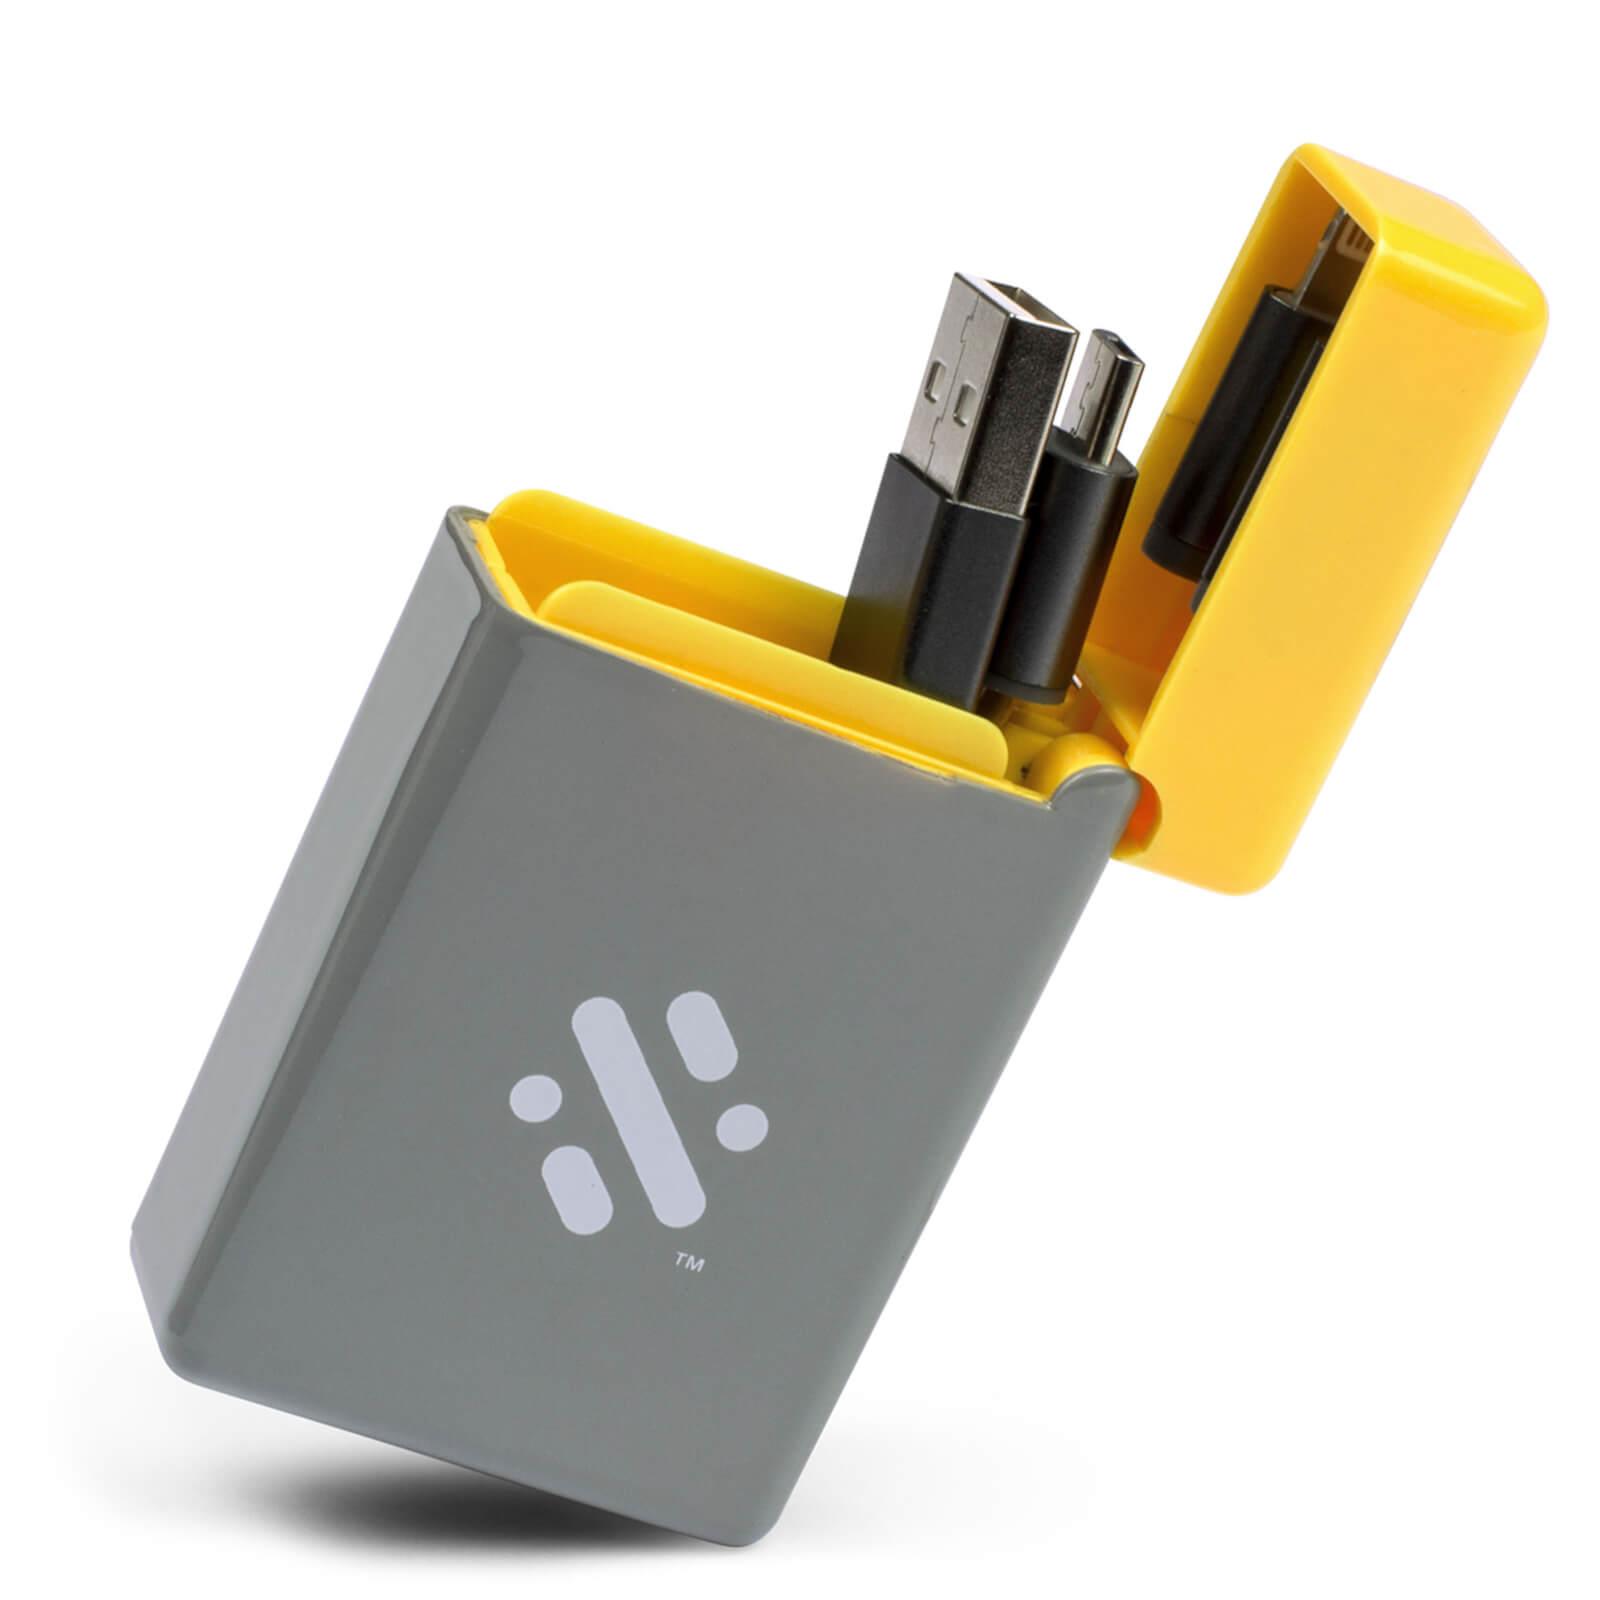 Flip - Retractable 3-in-1 Charge Cable - Yellow